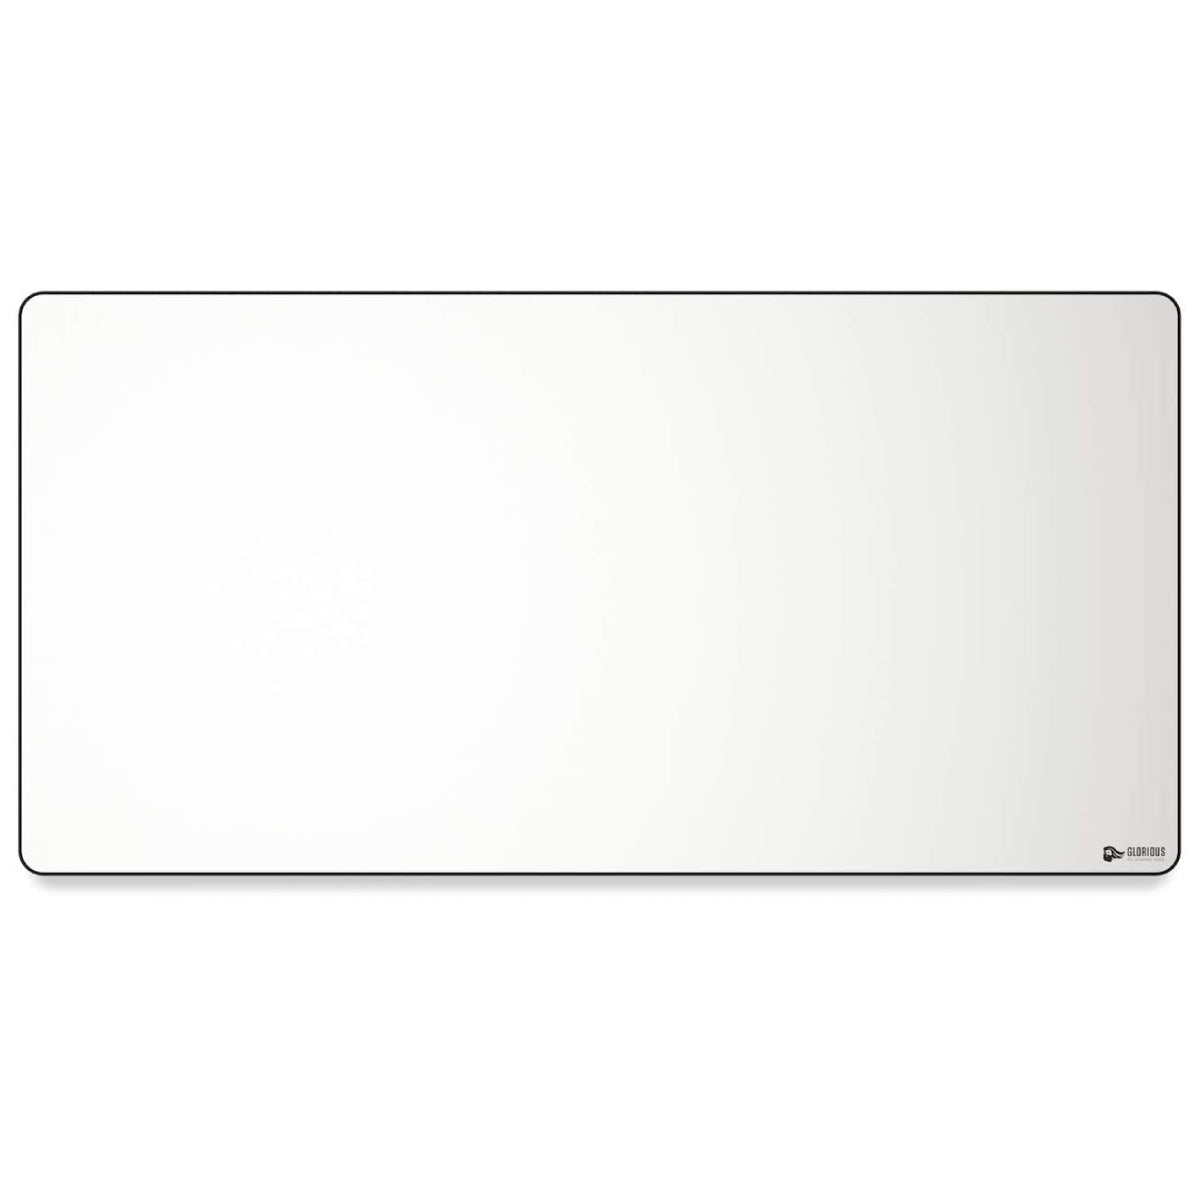 Glorious XXL Extended Gaming Mouse Pad - White - Store 974 | ستور ٩٧٤